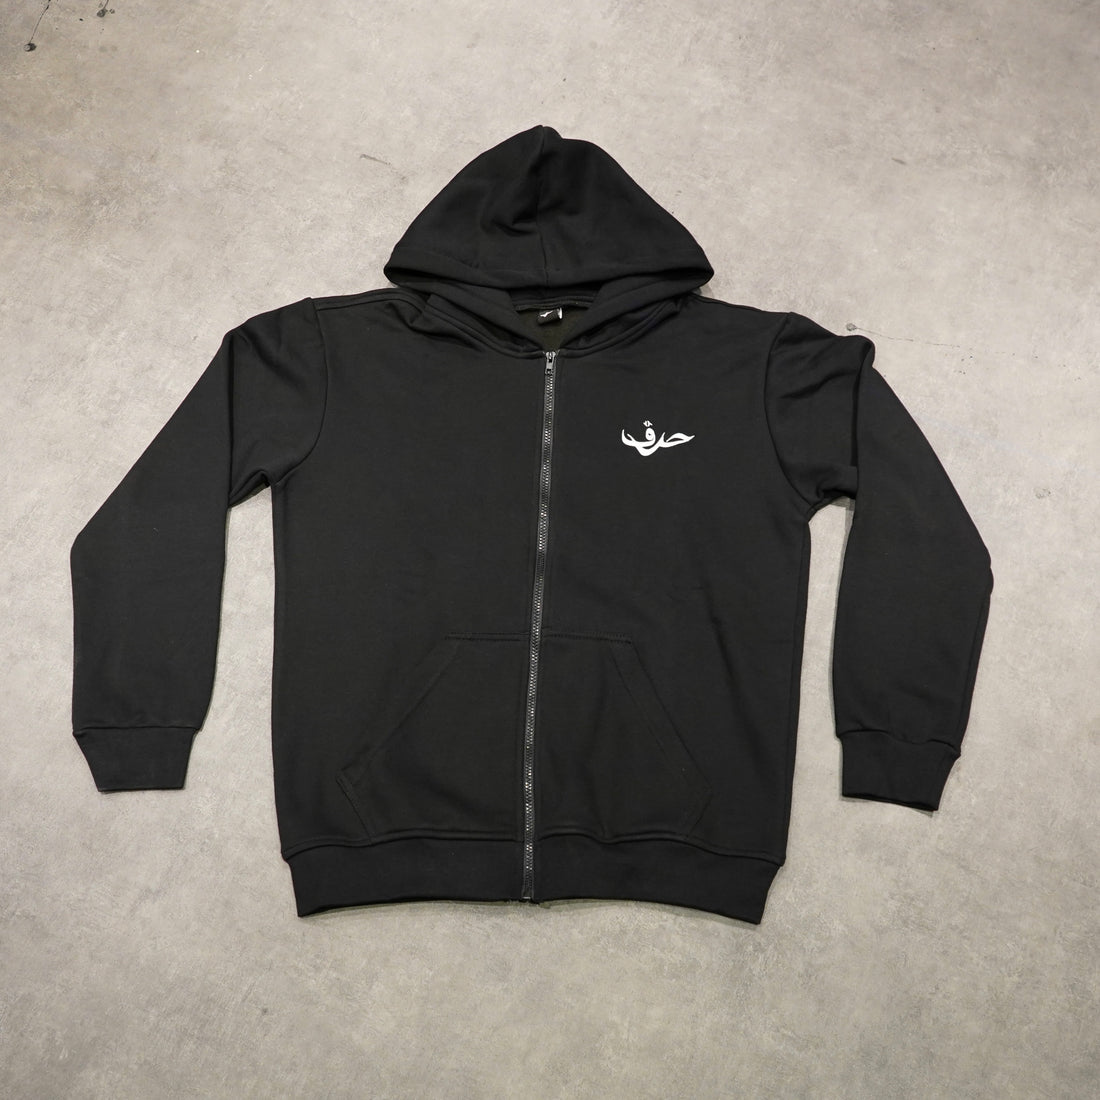 The 28 Letters Zip-up Jacket